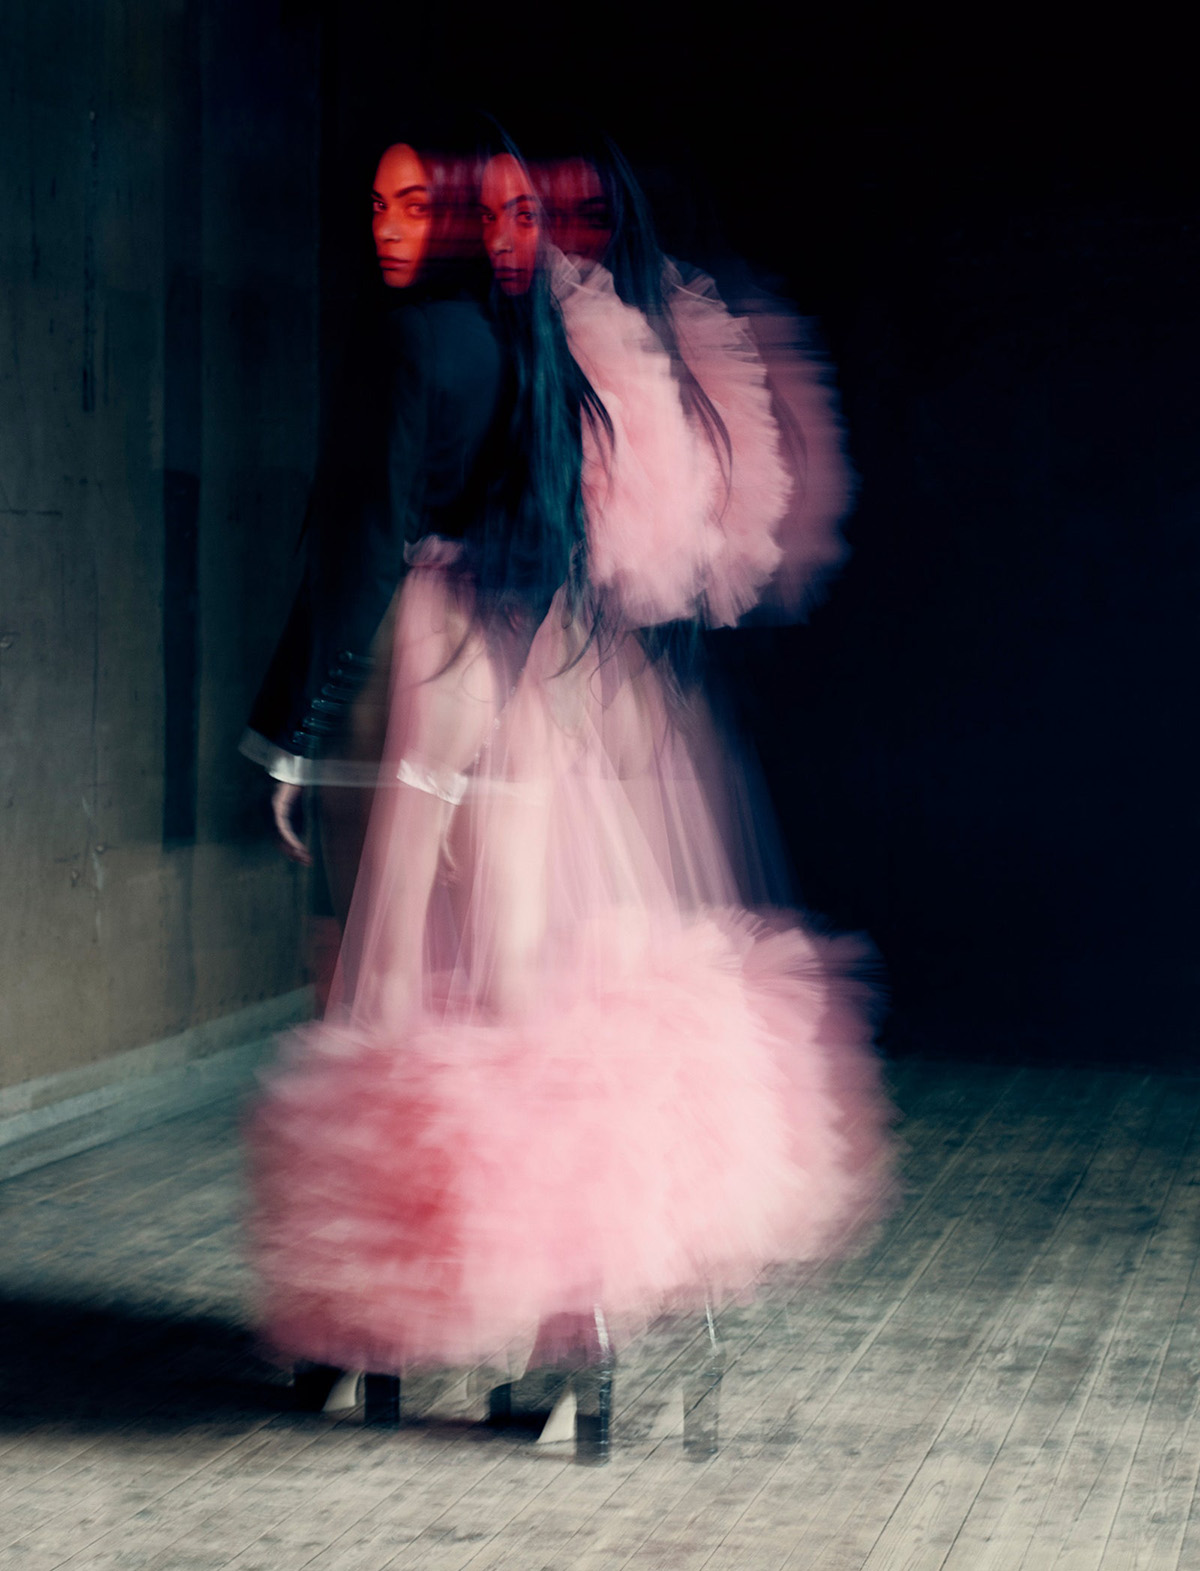 Elodie by Paolo Roversi for Vogue Italia November 2021